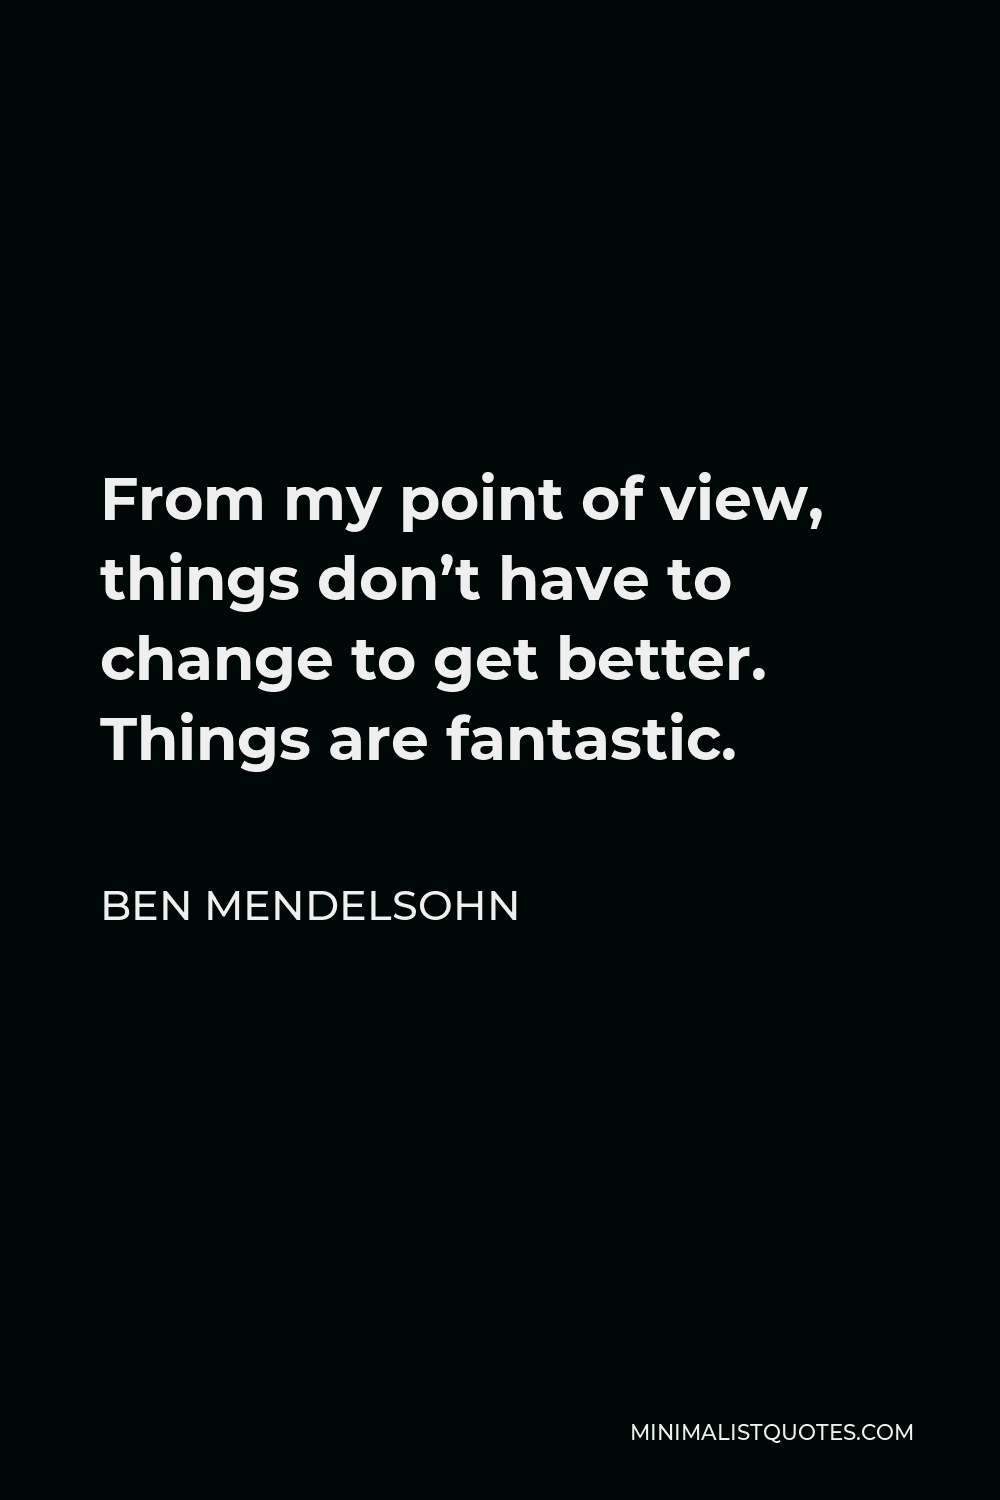 Ben Mendelsohn Quote - From my point of view, things don’t have to change to get better. Things are fantastic.